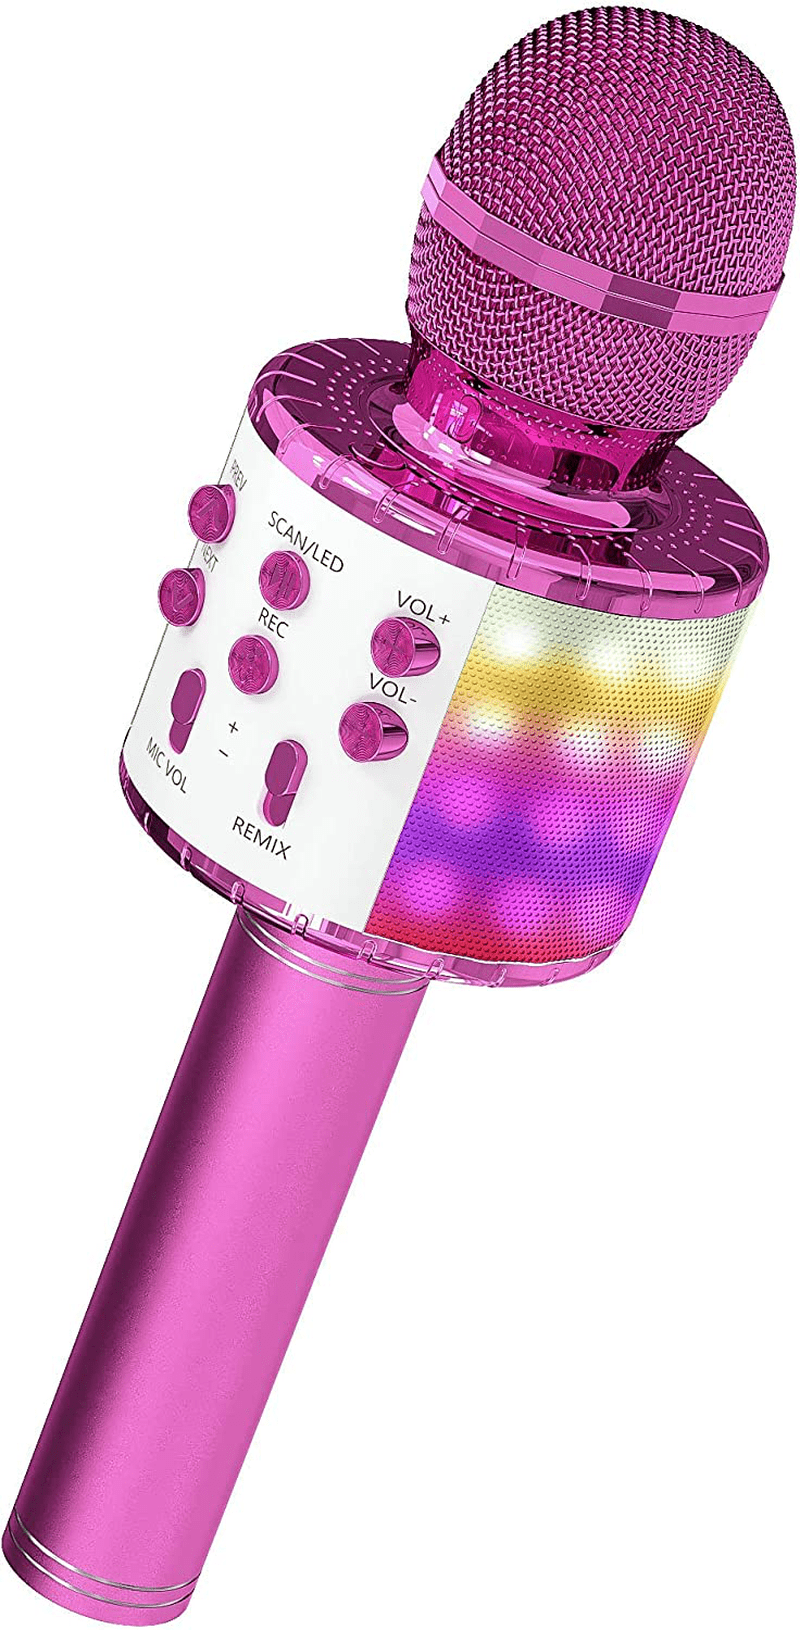 OVELLIC Karaoke Microphone for Kids, Wireless Bluetooth Karaoke Microphone with LED Lights, Portable Handheld Mic Speaker Machine, Great Gifts Toys for Girls Boys Adults All Age (Rose Gold) Electronics > Audio > Audio Components > Microphones OVELLIC Purple  